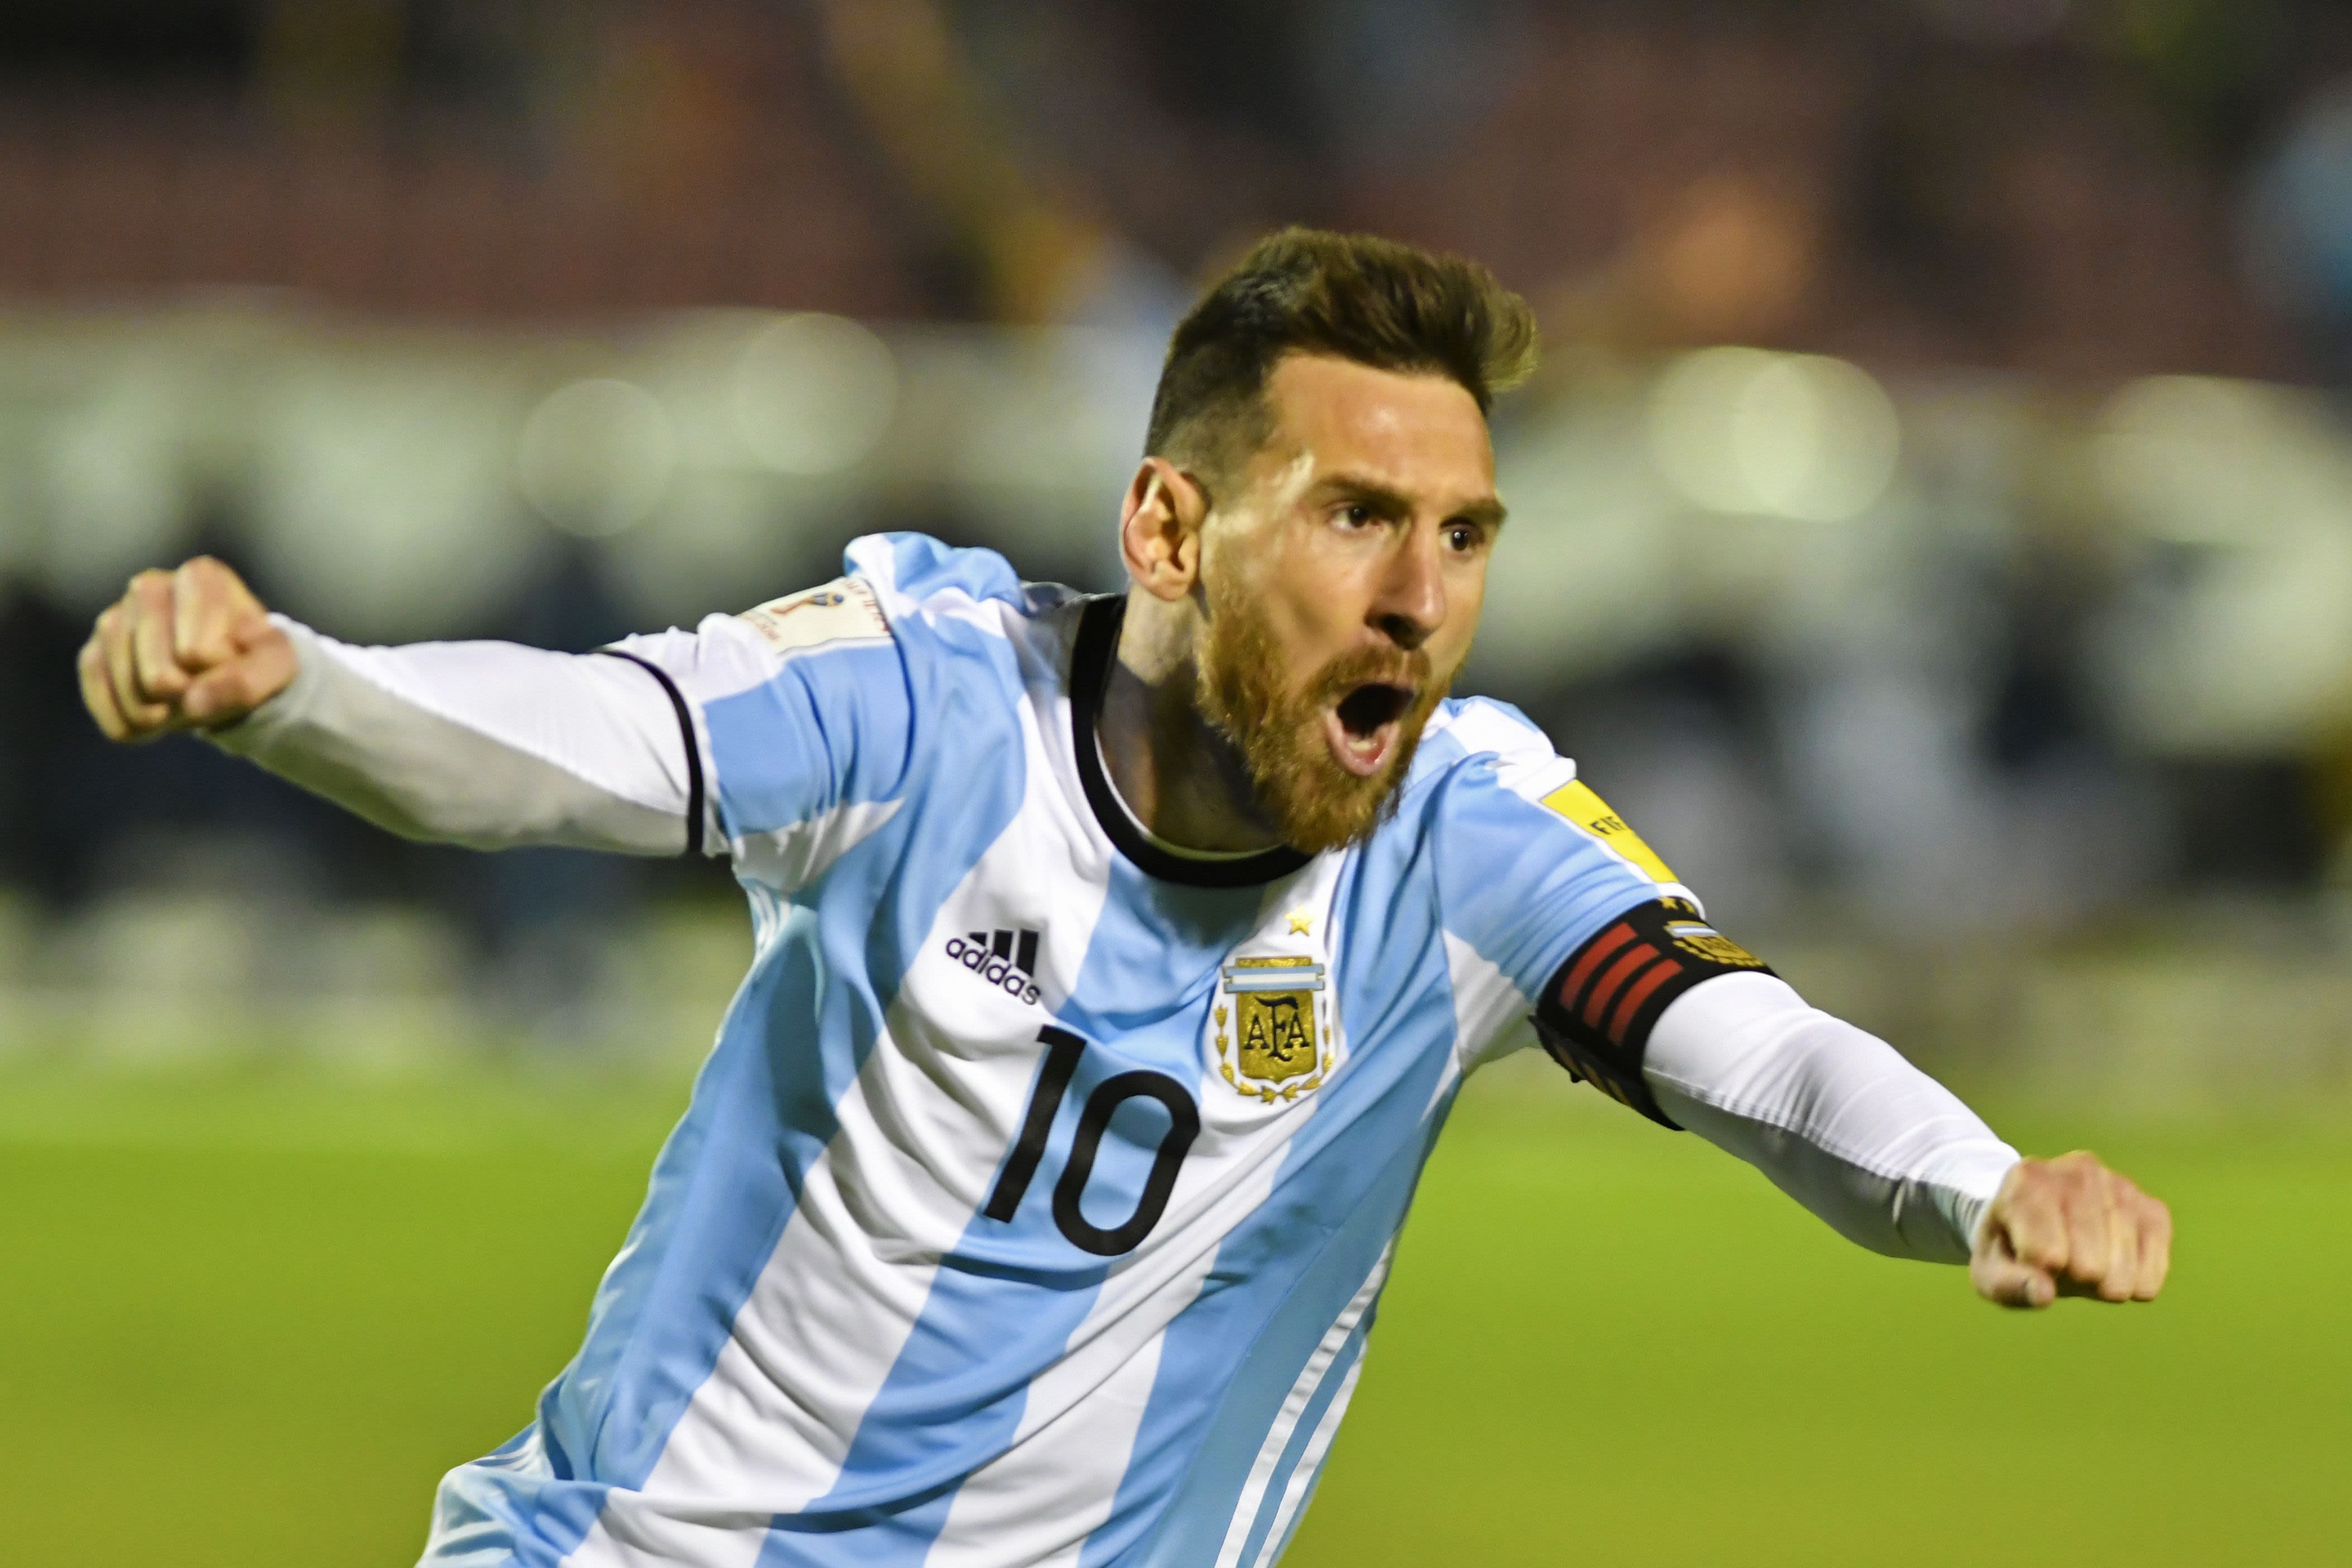 Lionel Messi criticism for lack of World Cup is 'ridiculous' - Mario Kempes  - ESPN